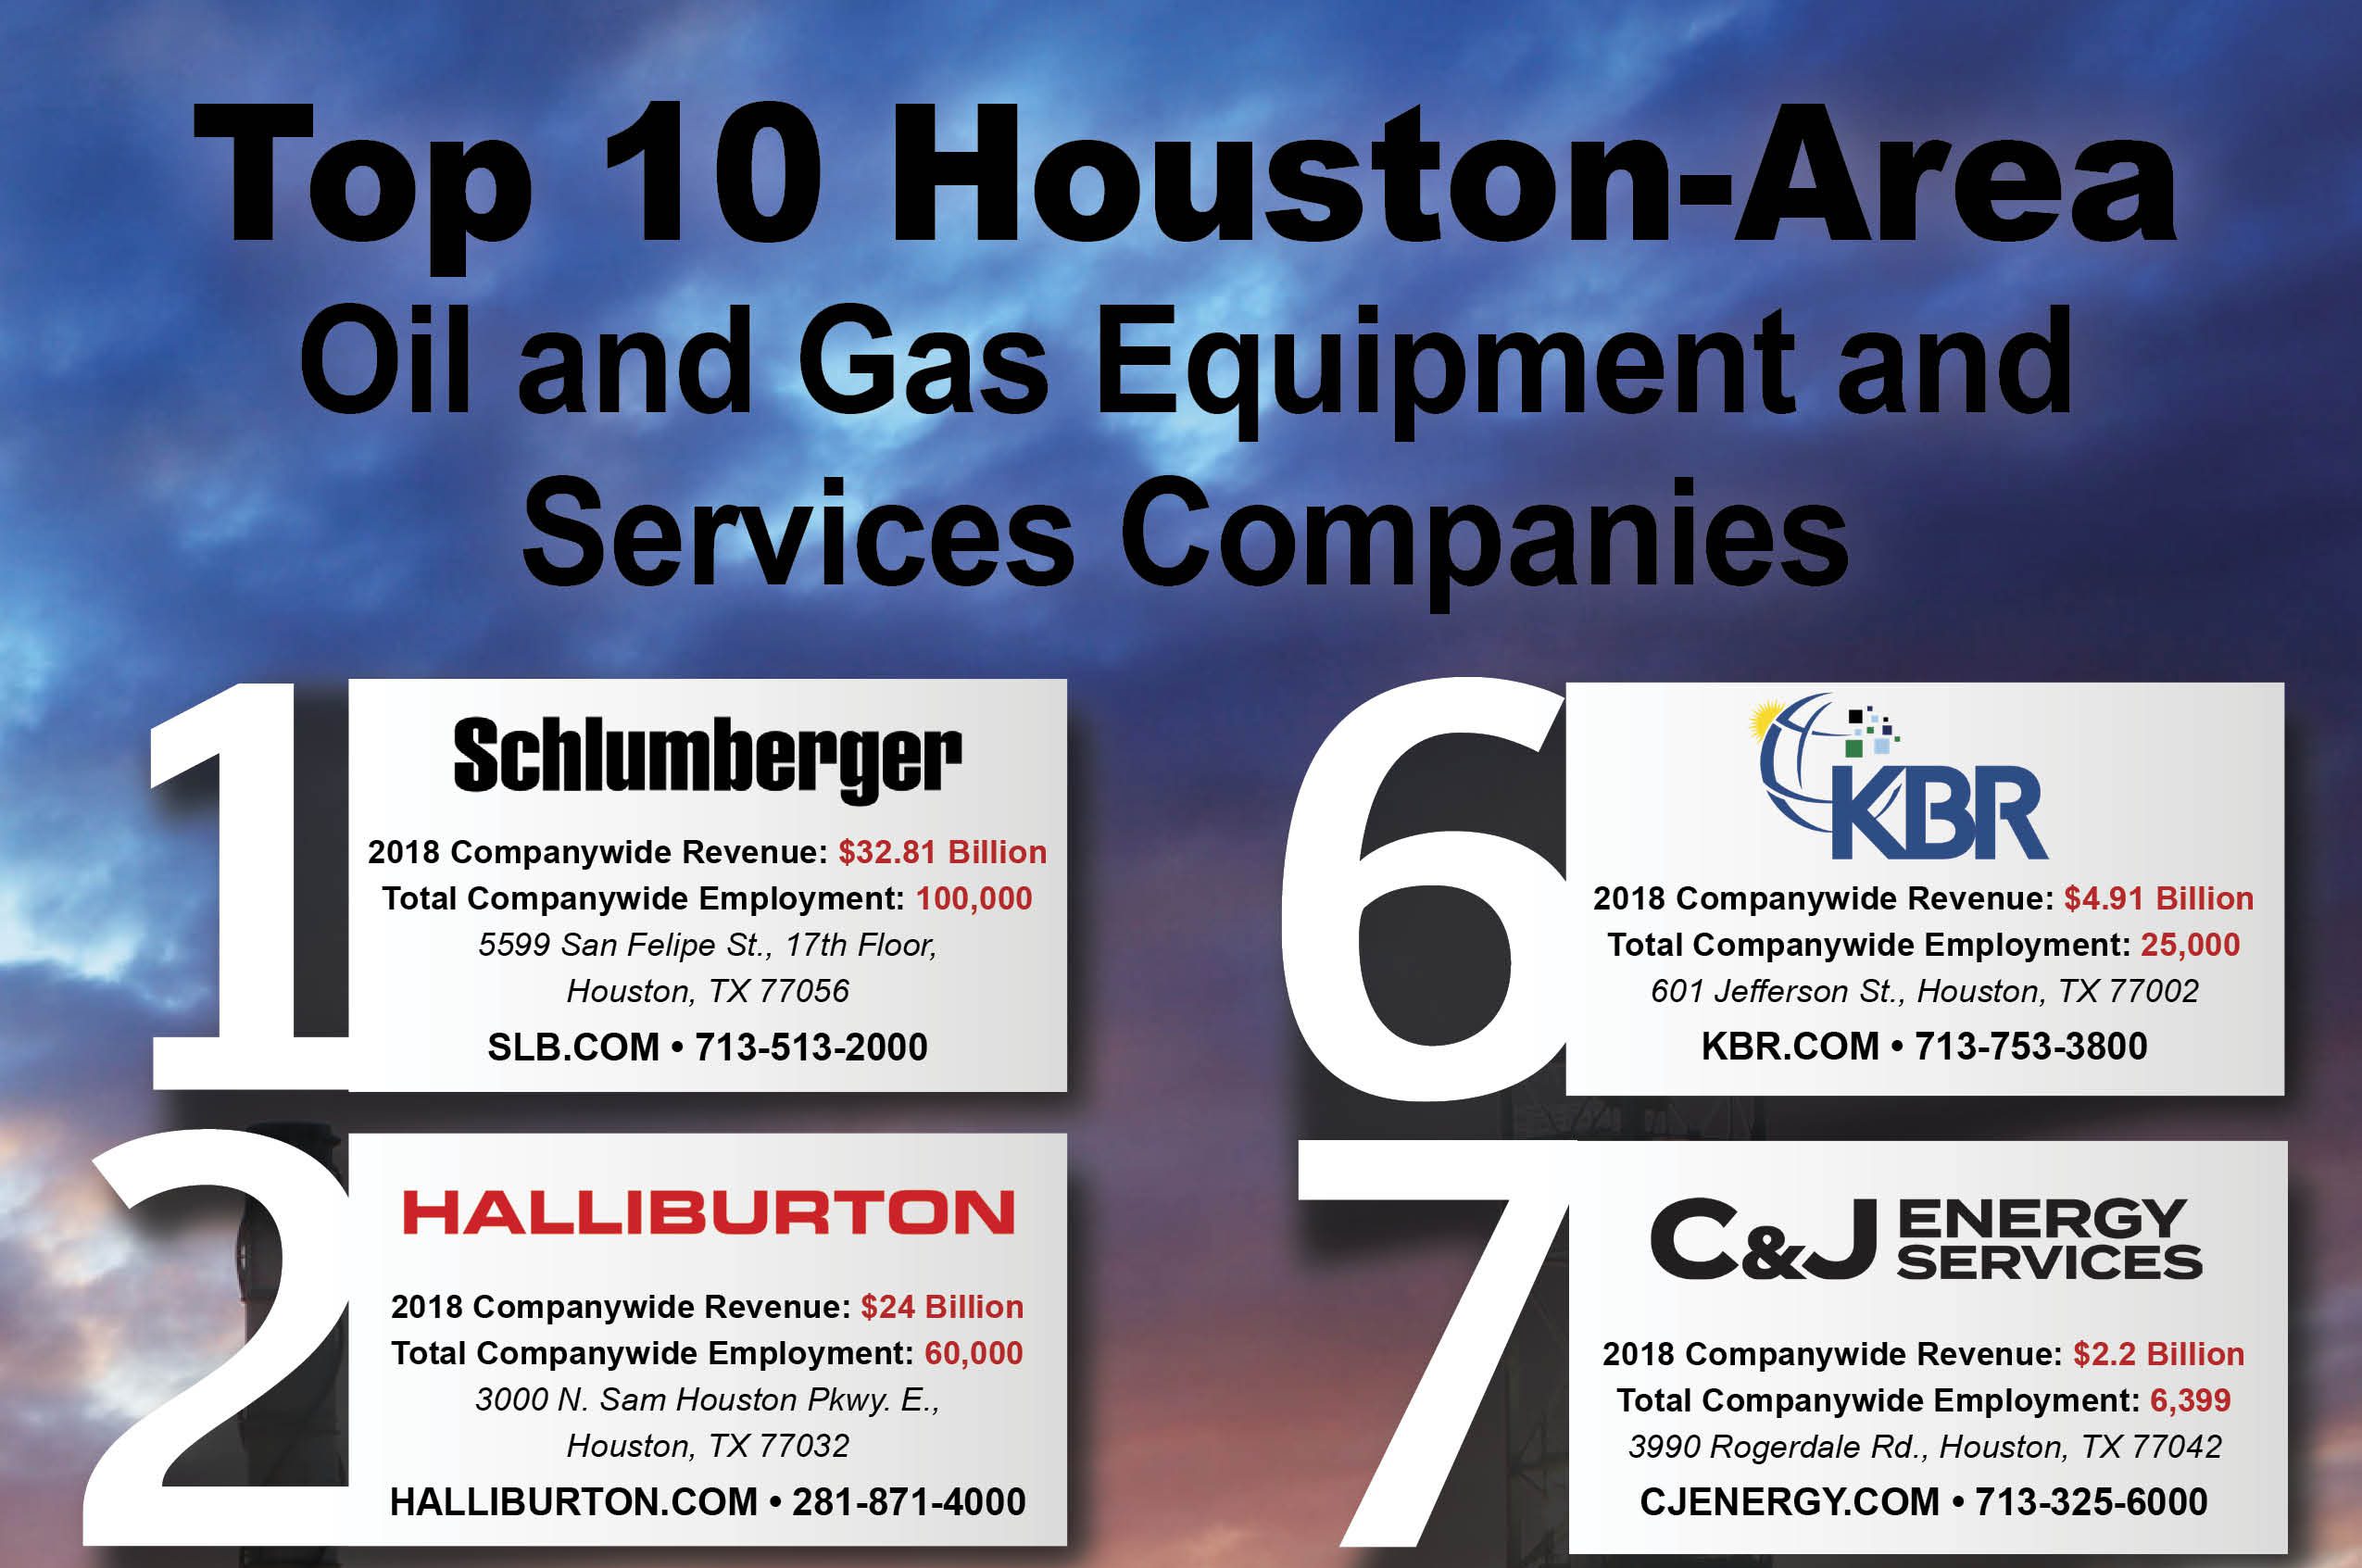 Top 10 HoustonArea Oil and Gas Equipment and Services Companies